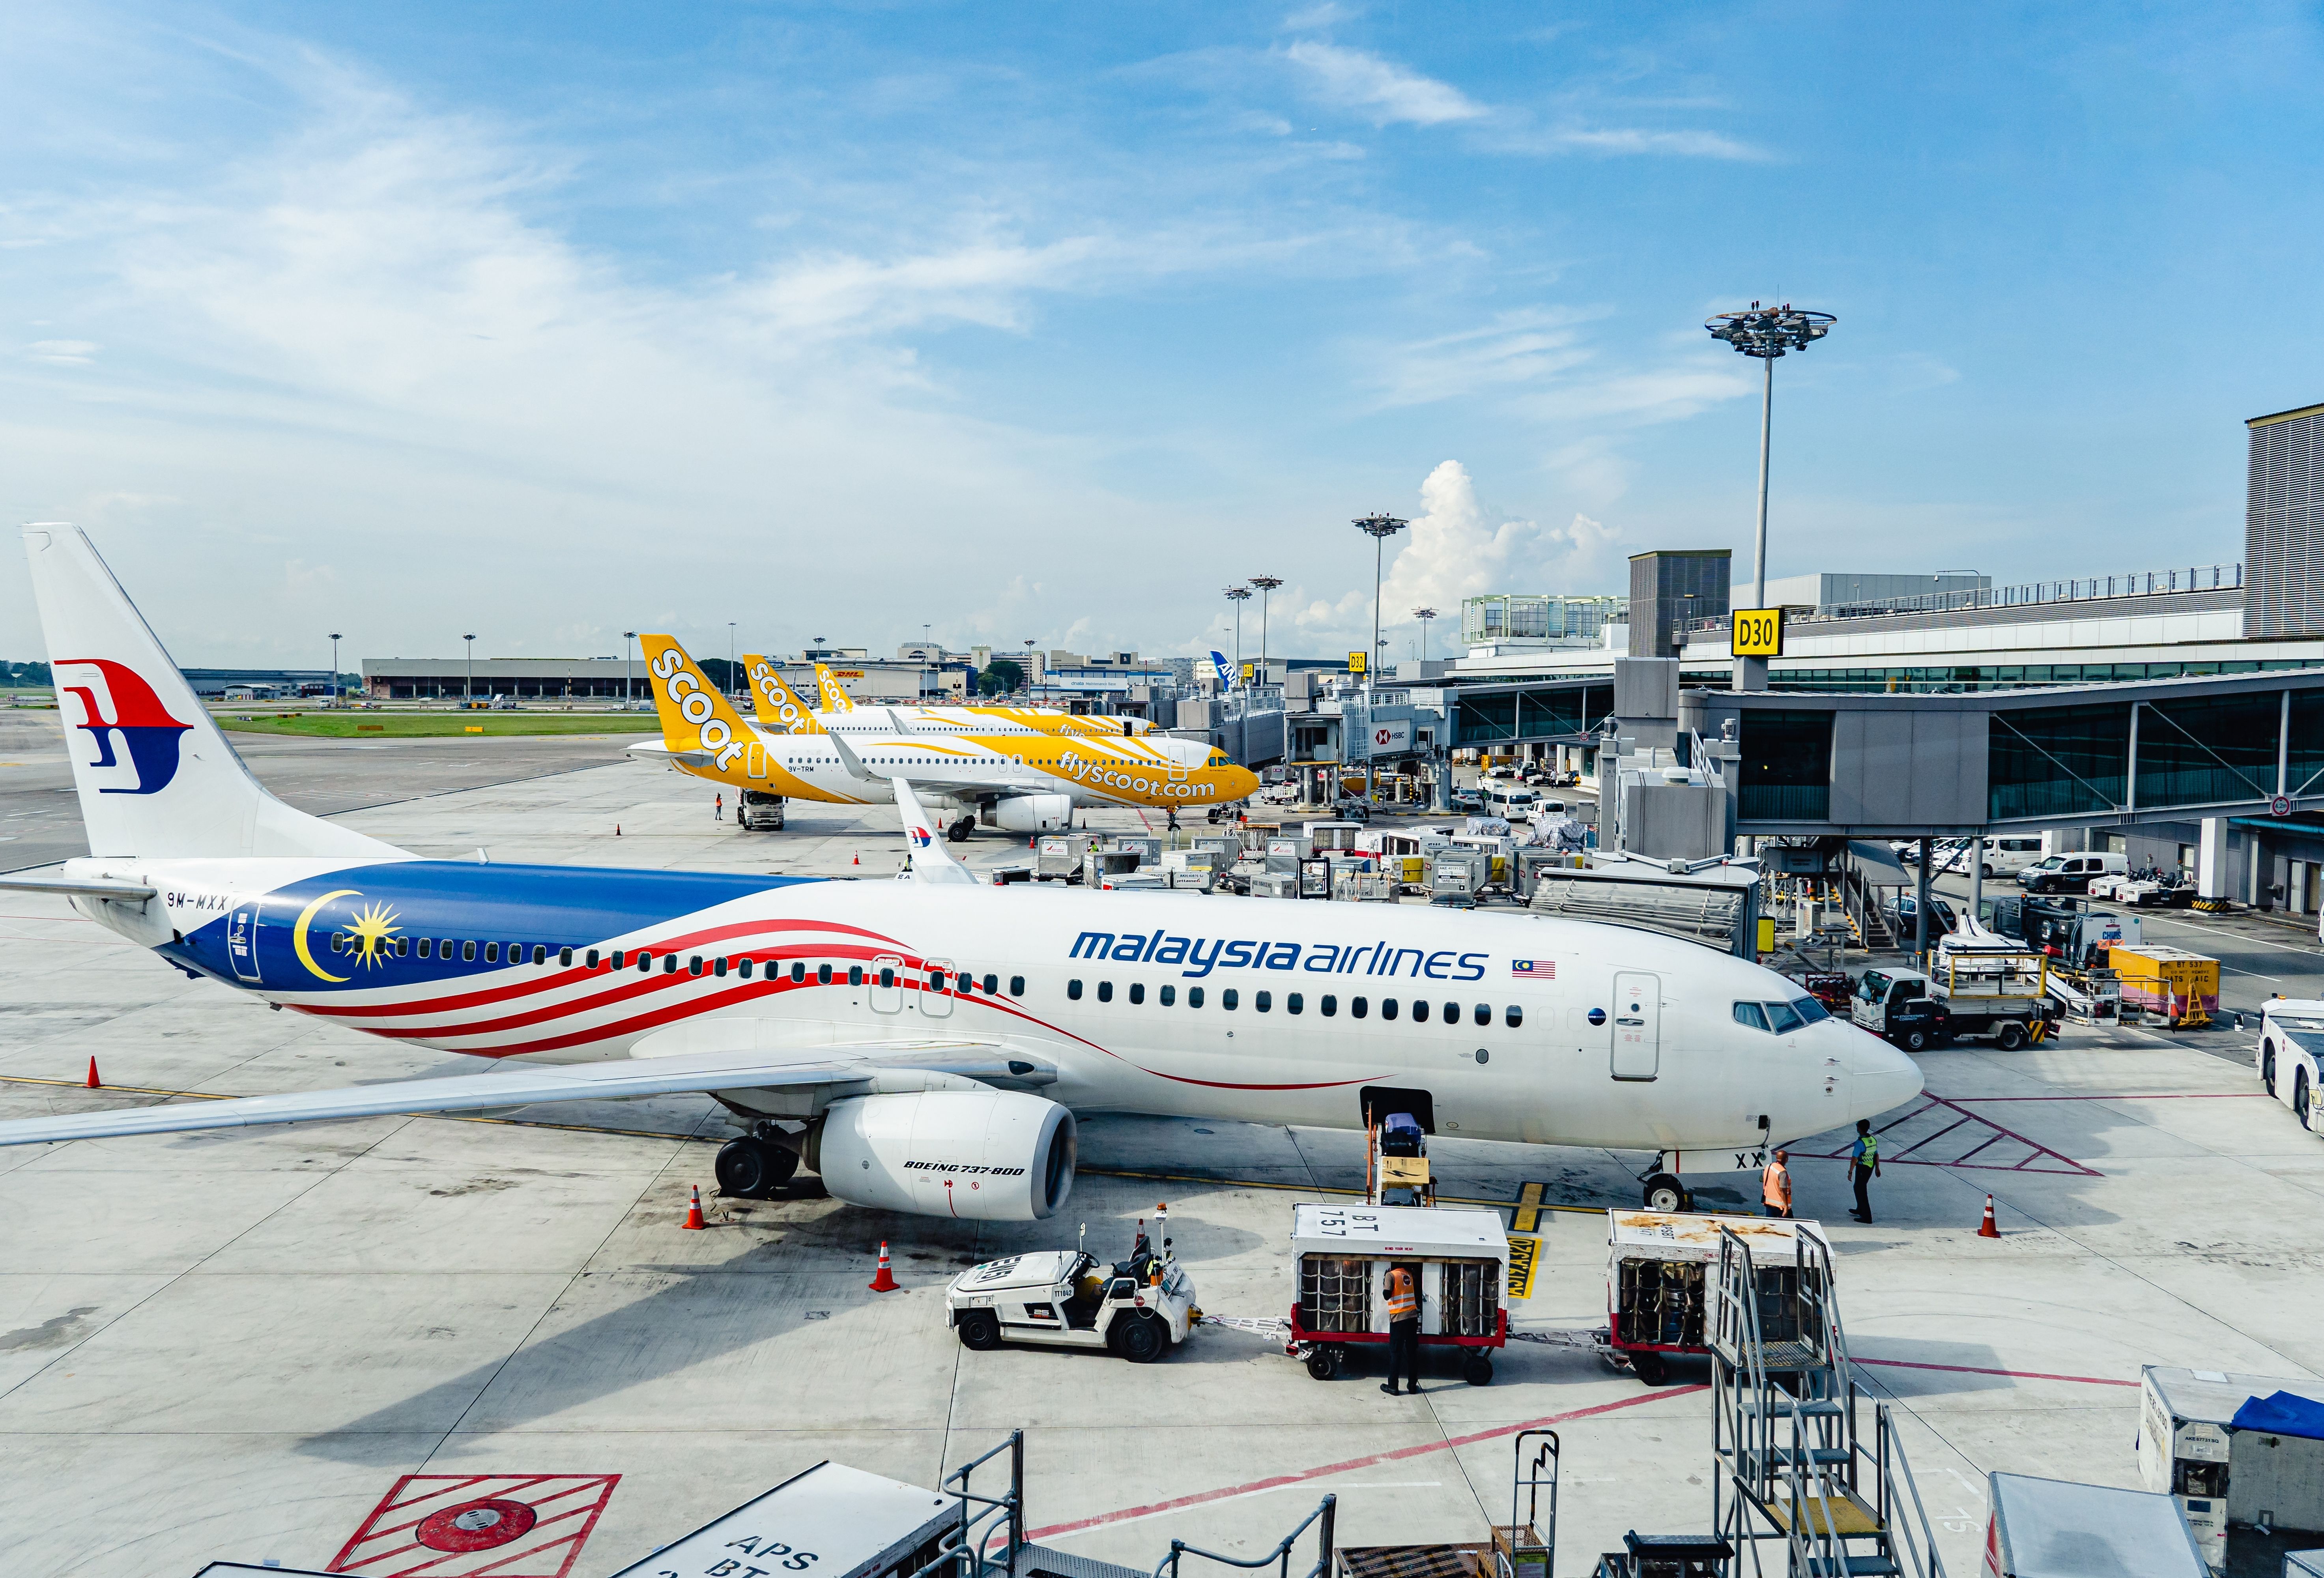 Scoot and Malaysia Airlines aircraft parked at Singapore Changi Airport.